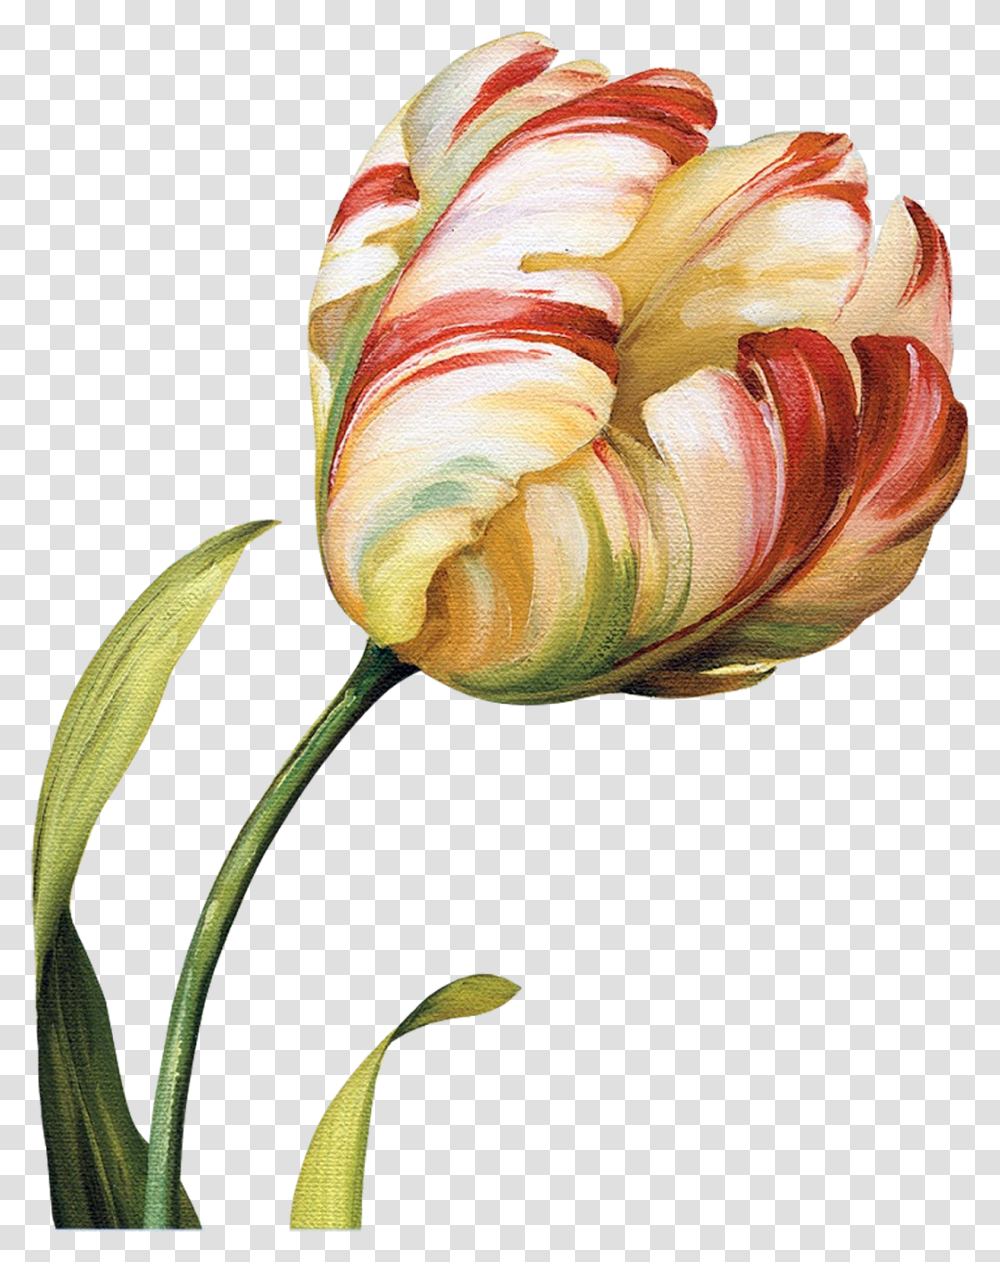 Tulips Flowers Abstract Flowers Flower Art Botanical Abstract Botanical Flowers, Plant, Blossom, Rose, Petal Transparent Png